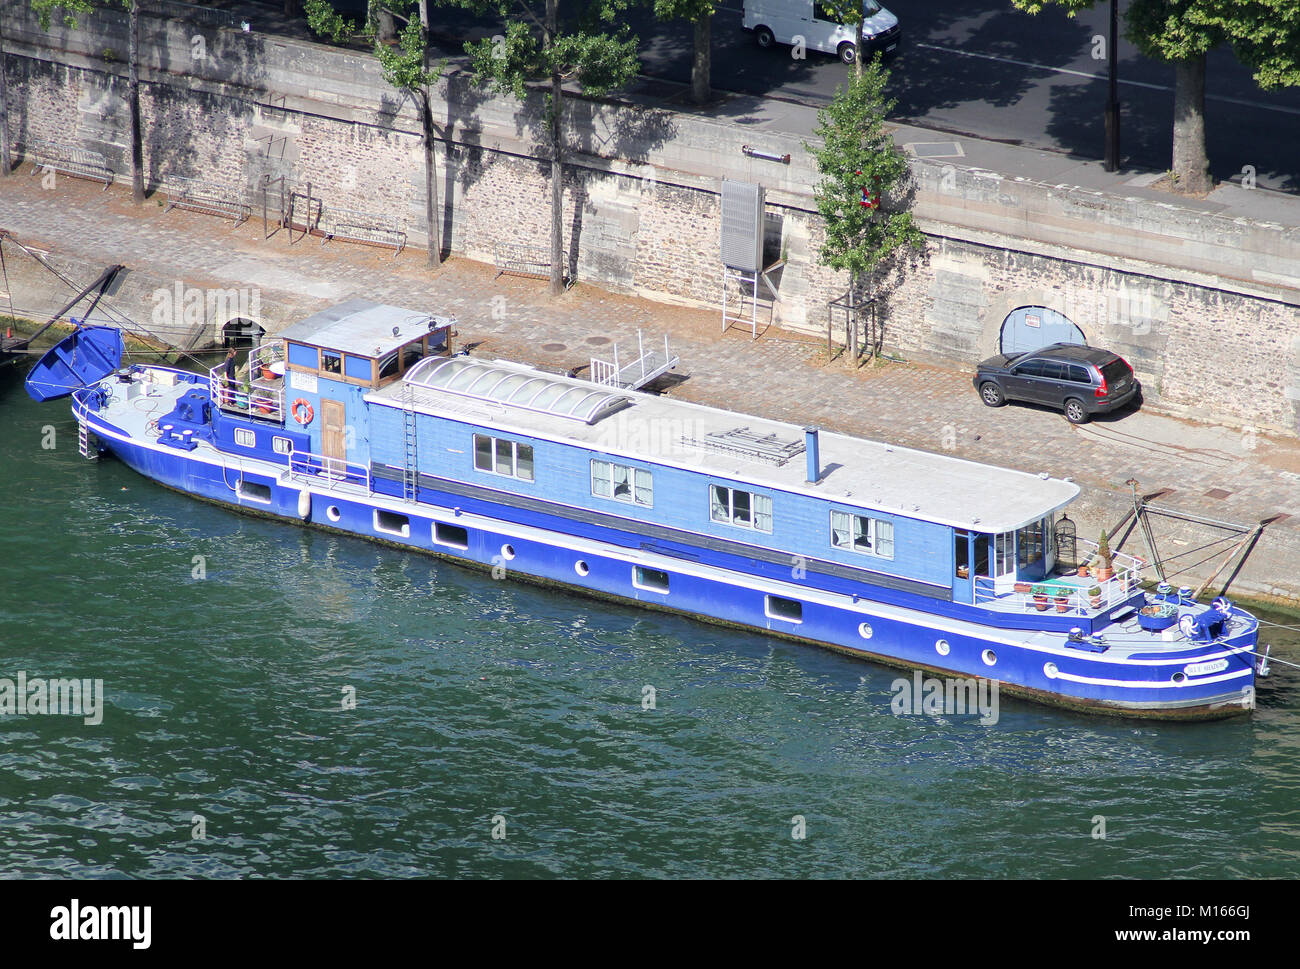 A Blue cruise boat called the Blue Shadow, Seine River, Paris, France. Stock Photo